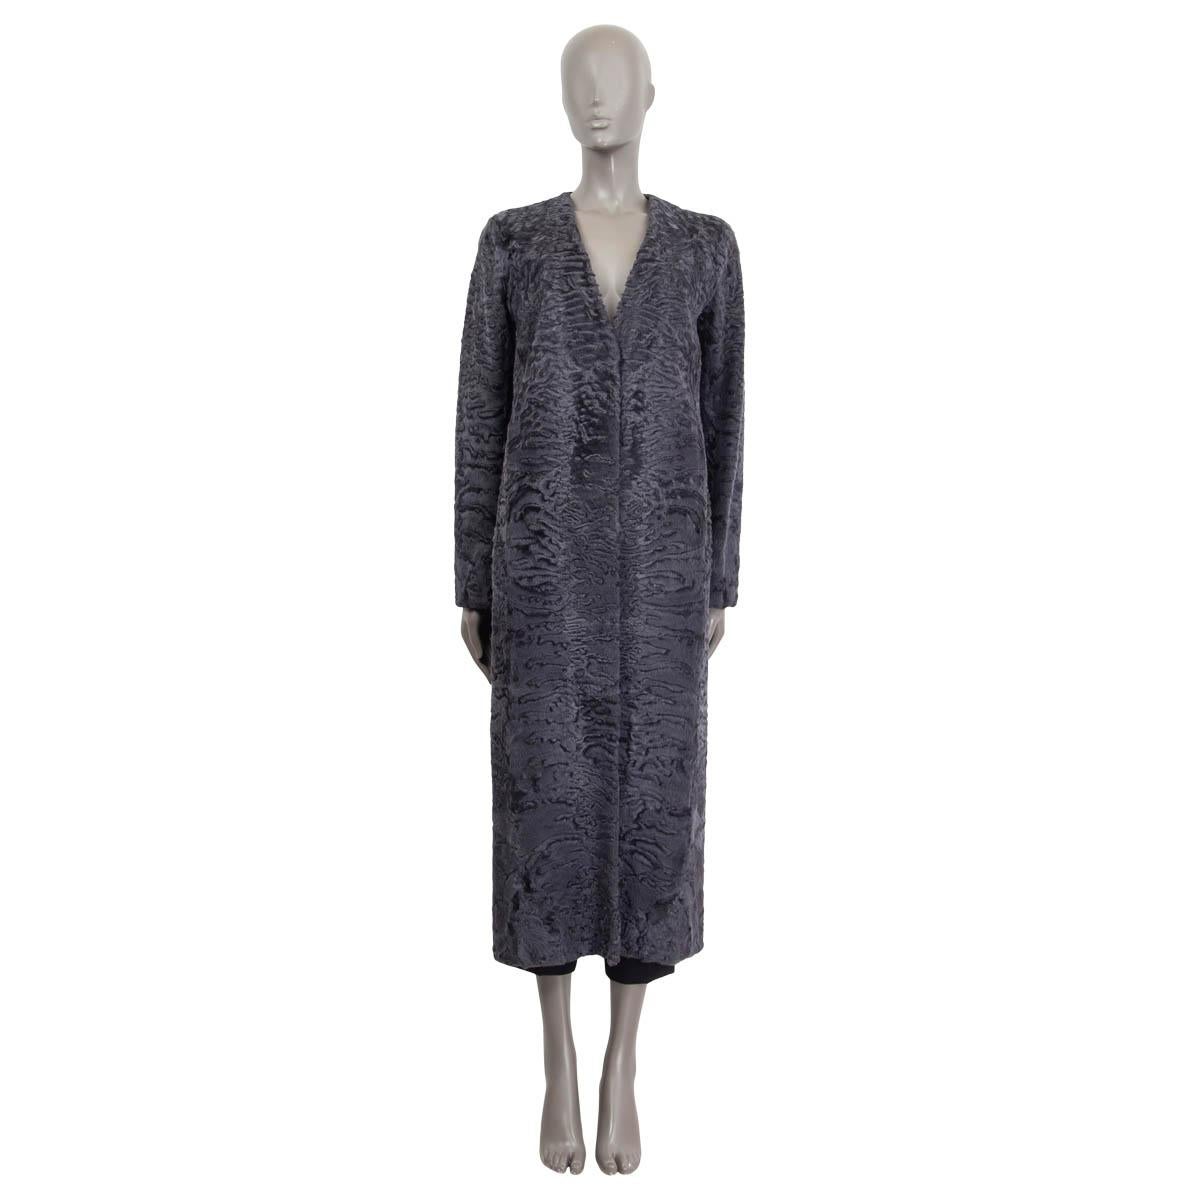 100% authentic The Row 'Denise Astrakhan' fur coat in charcoal dyed lamb fur (100%). Features a deep v-neck and a slit on the back. Opens with two hooks on the front. Lined in charcoal silk (100%). Has been worn once and is in virtually new